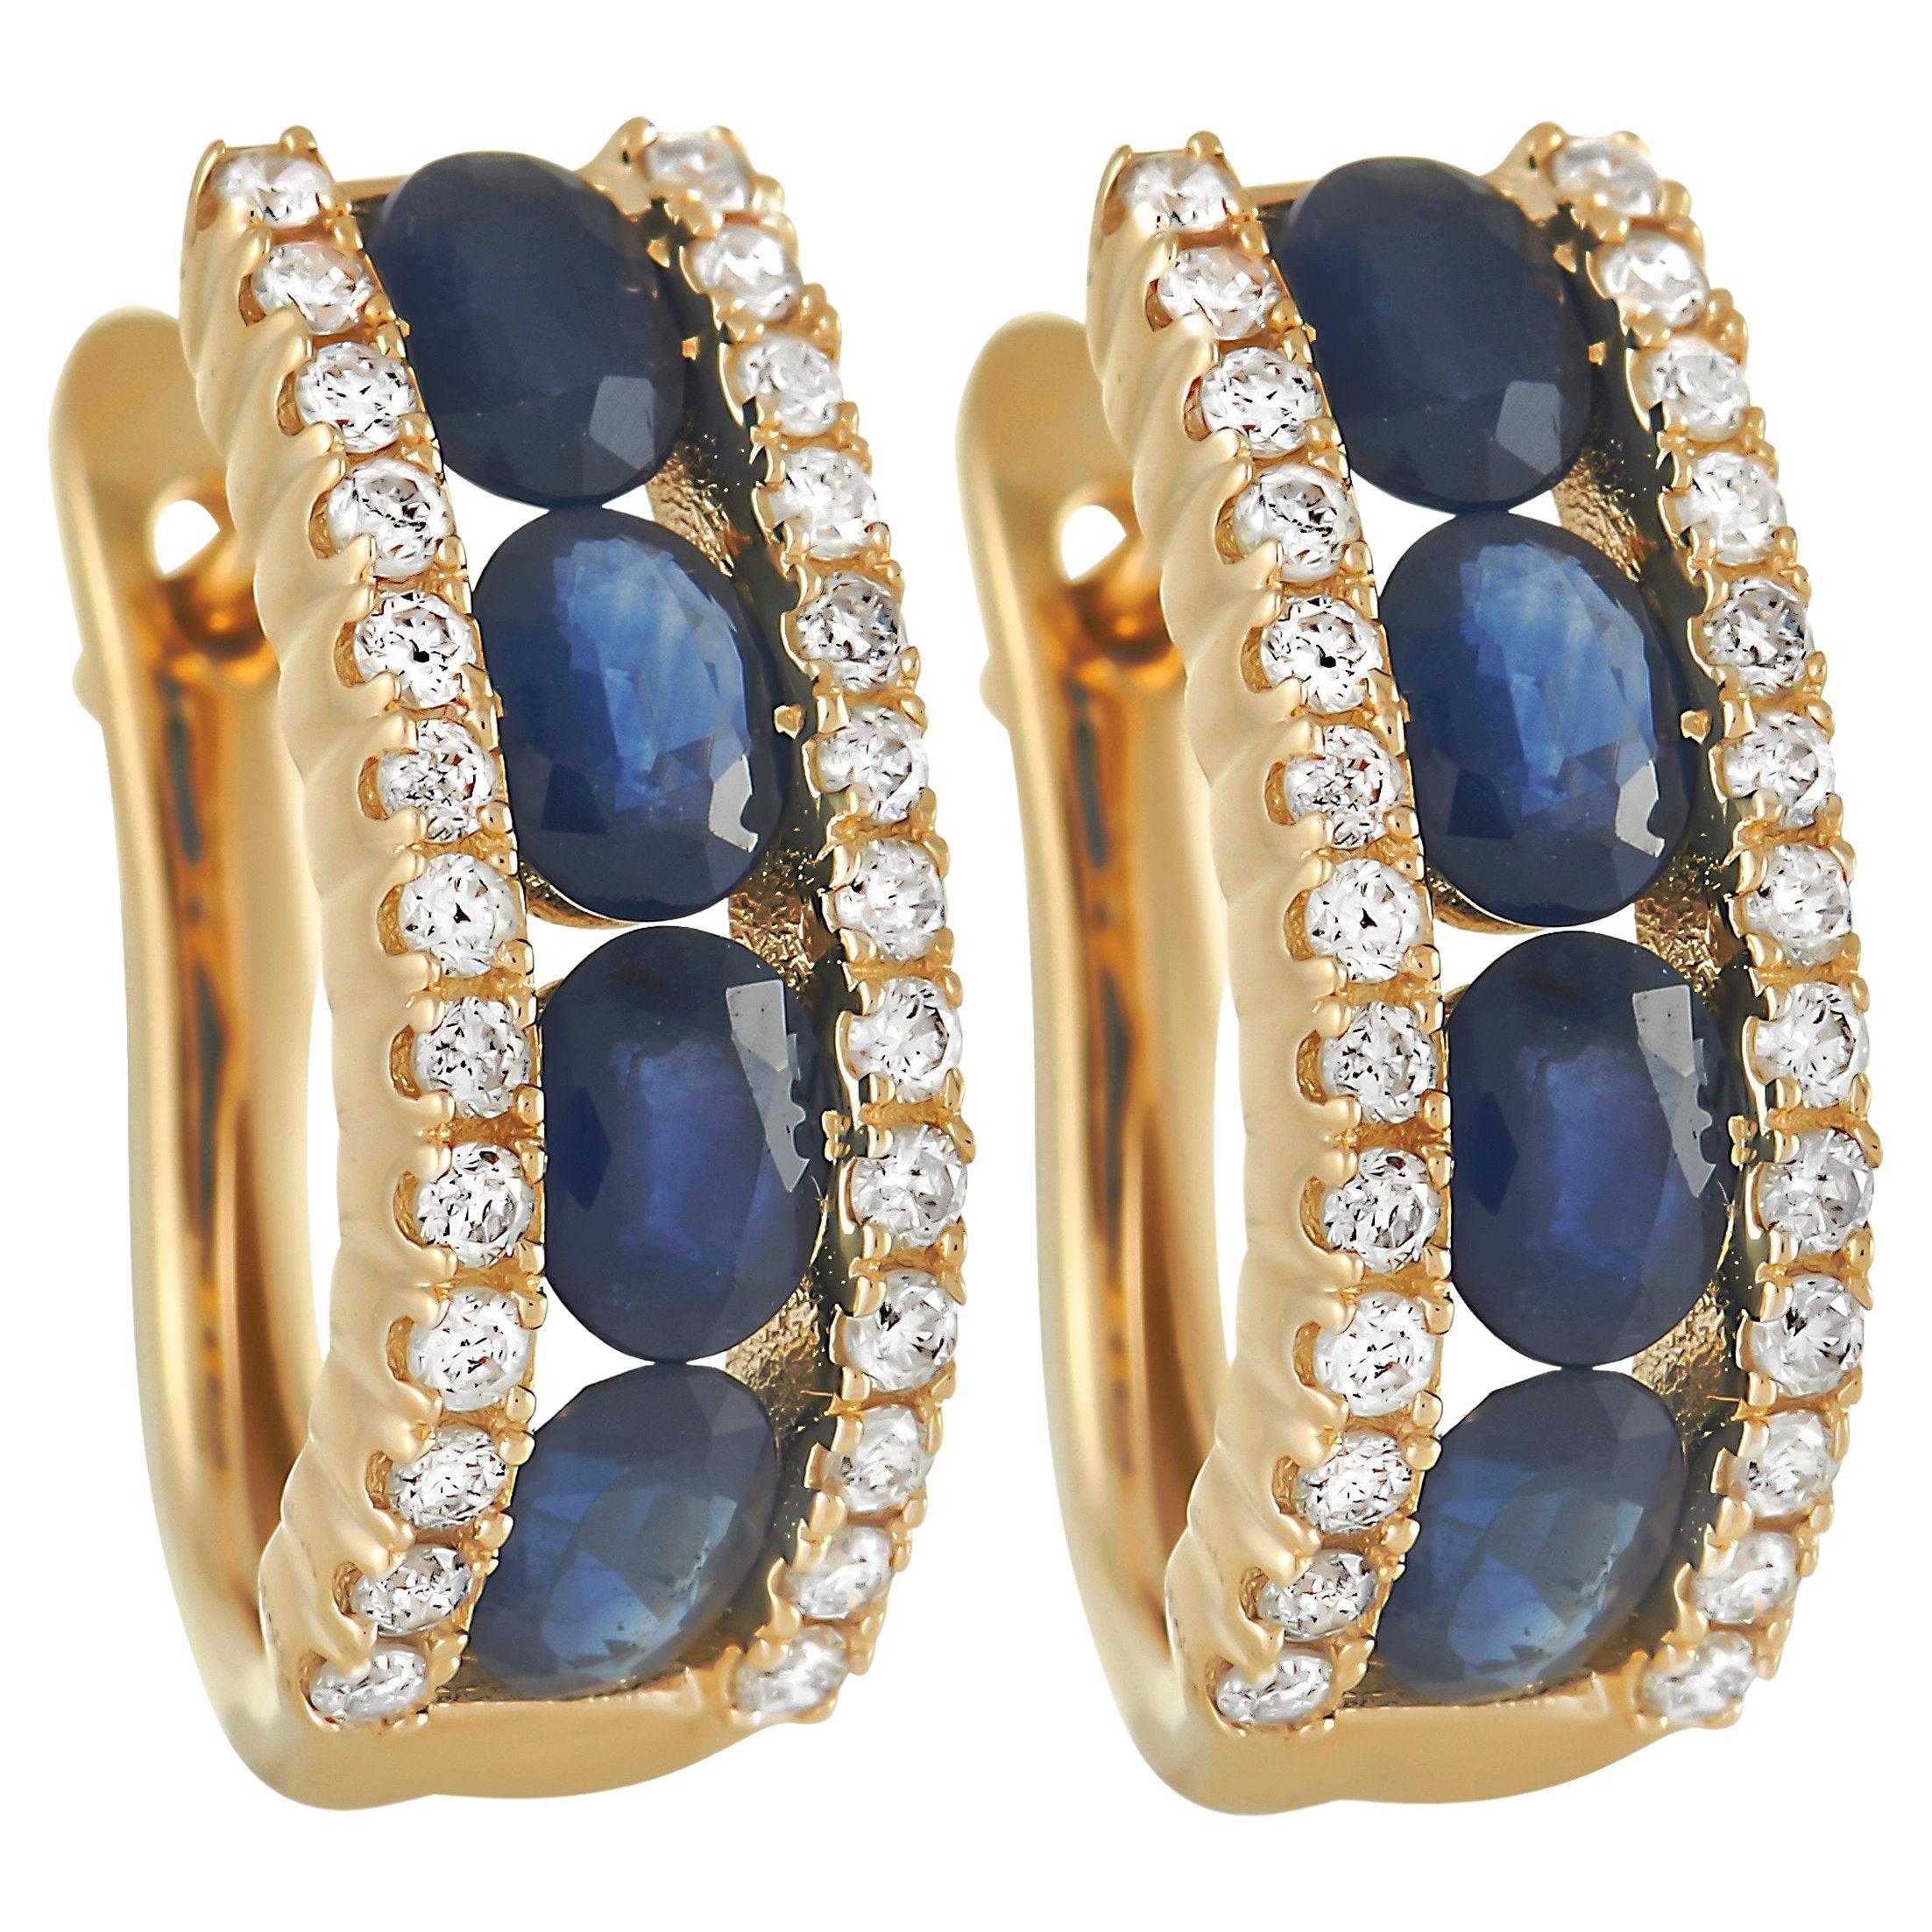 LB Exclusive 14K Yellow Gold 0.39 Ct Diamond and Sapphire Earrings